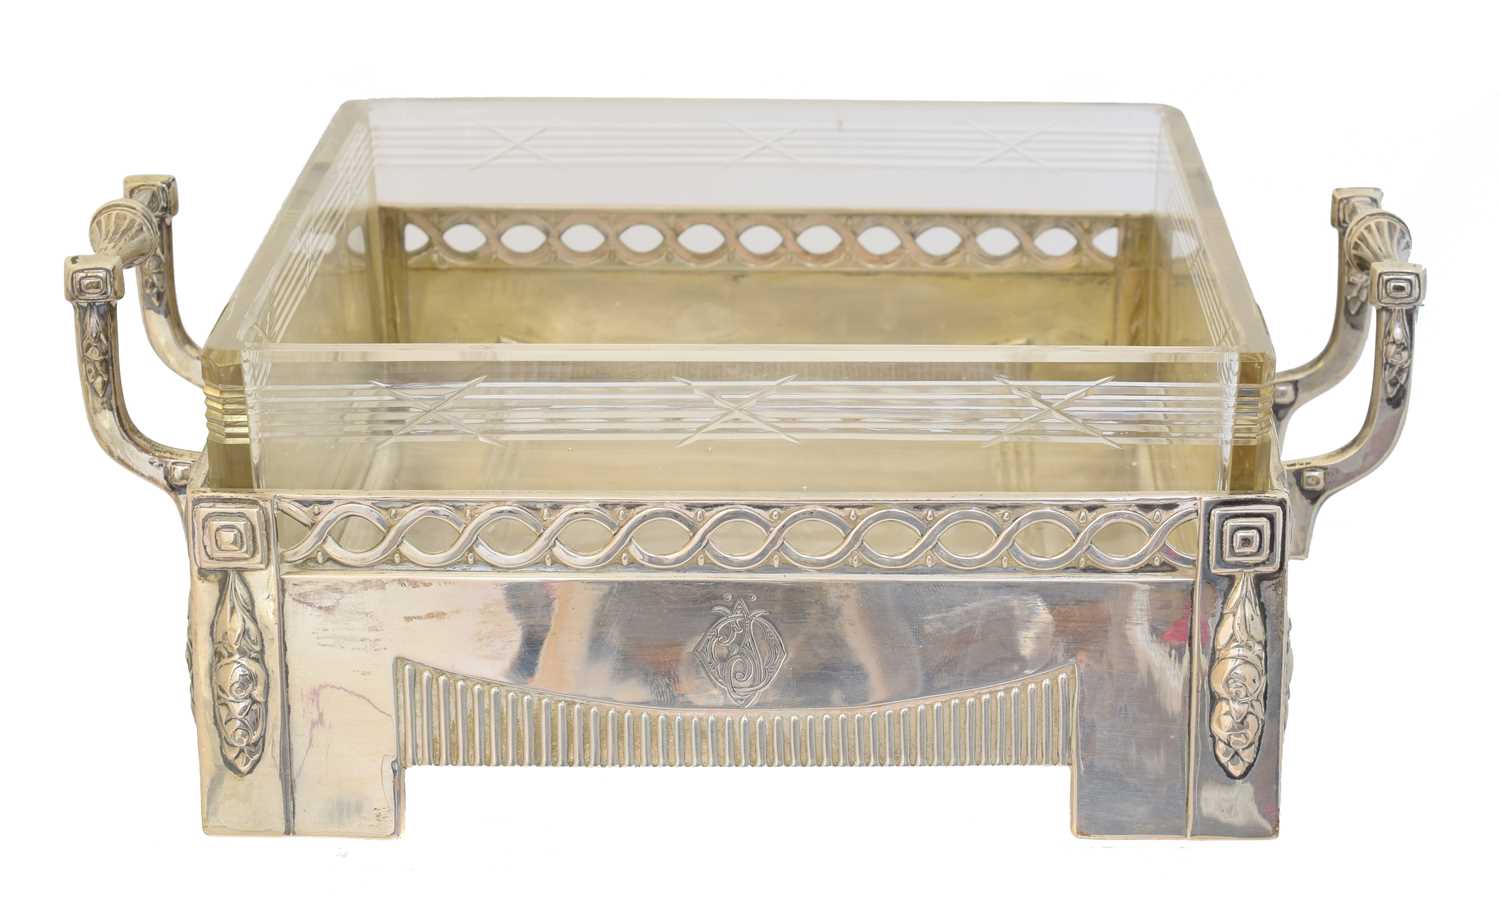 Lot 188 - An early 20th century German silver centrepiece